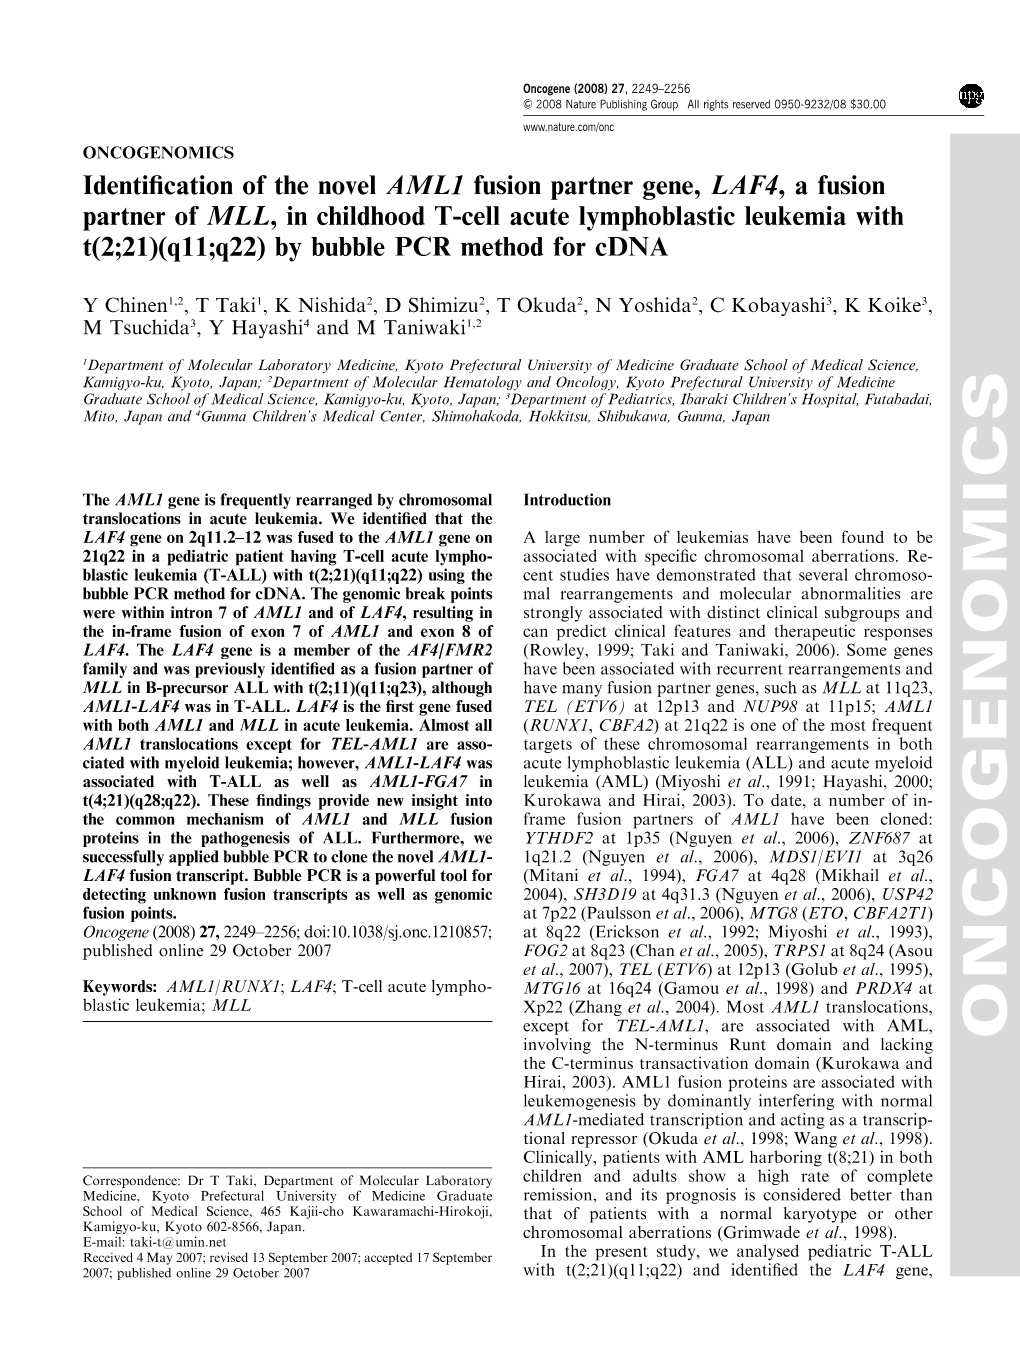 Identification of the Novel AML1 Fusion Partner Gene, LAF4, a Fusion Partner of MLL, in Childhood T-Cell Acute Lymphoblastic Leukemia with T (2; 21)(Q11; Q22) by Bubble PCR Method for Cdna